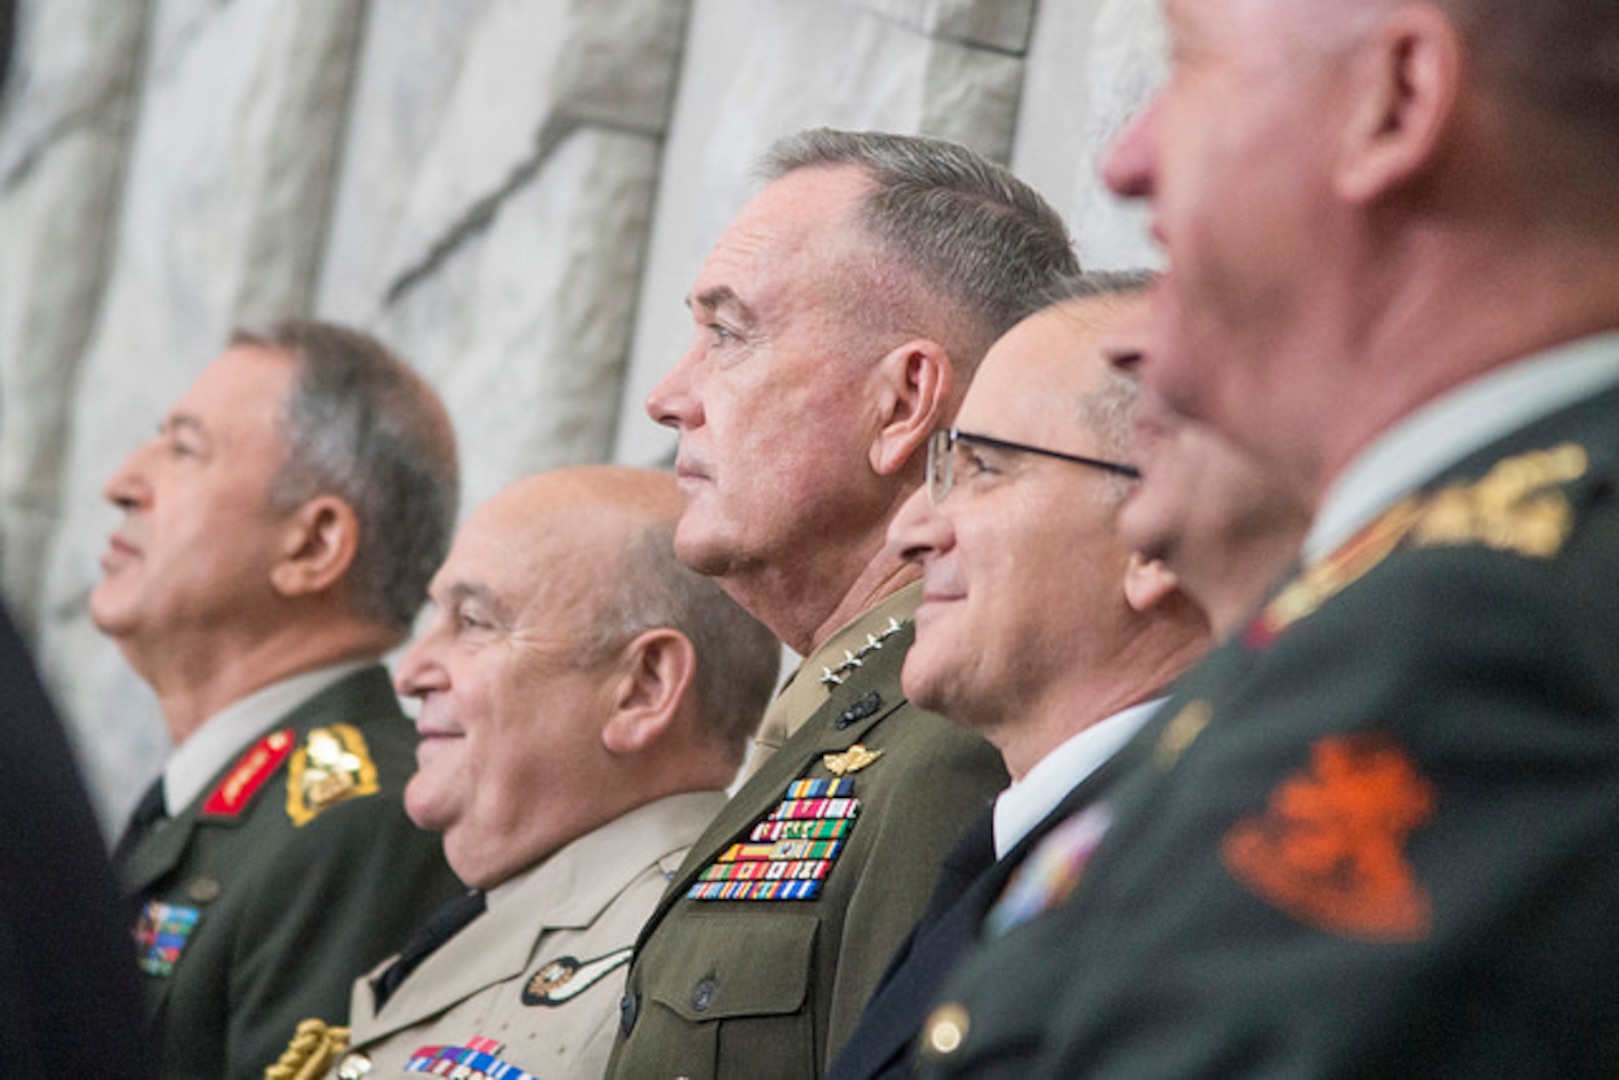 44 Creative Chairman of the joint chiefs of staff risk assessment with Simple Design